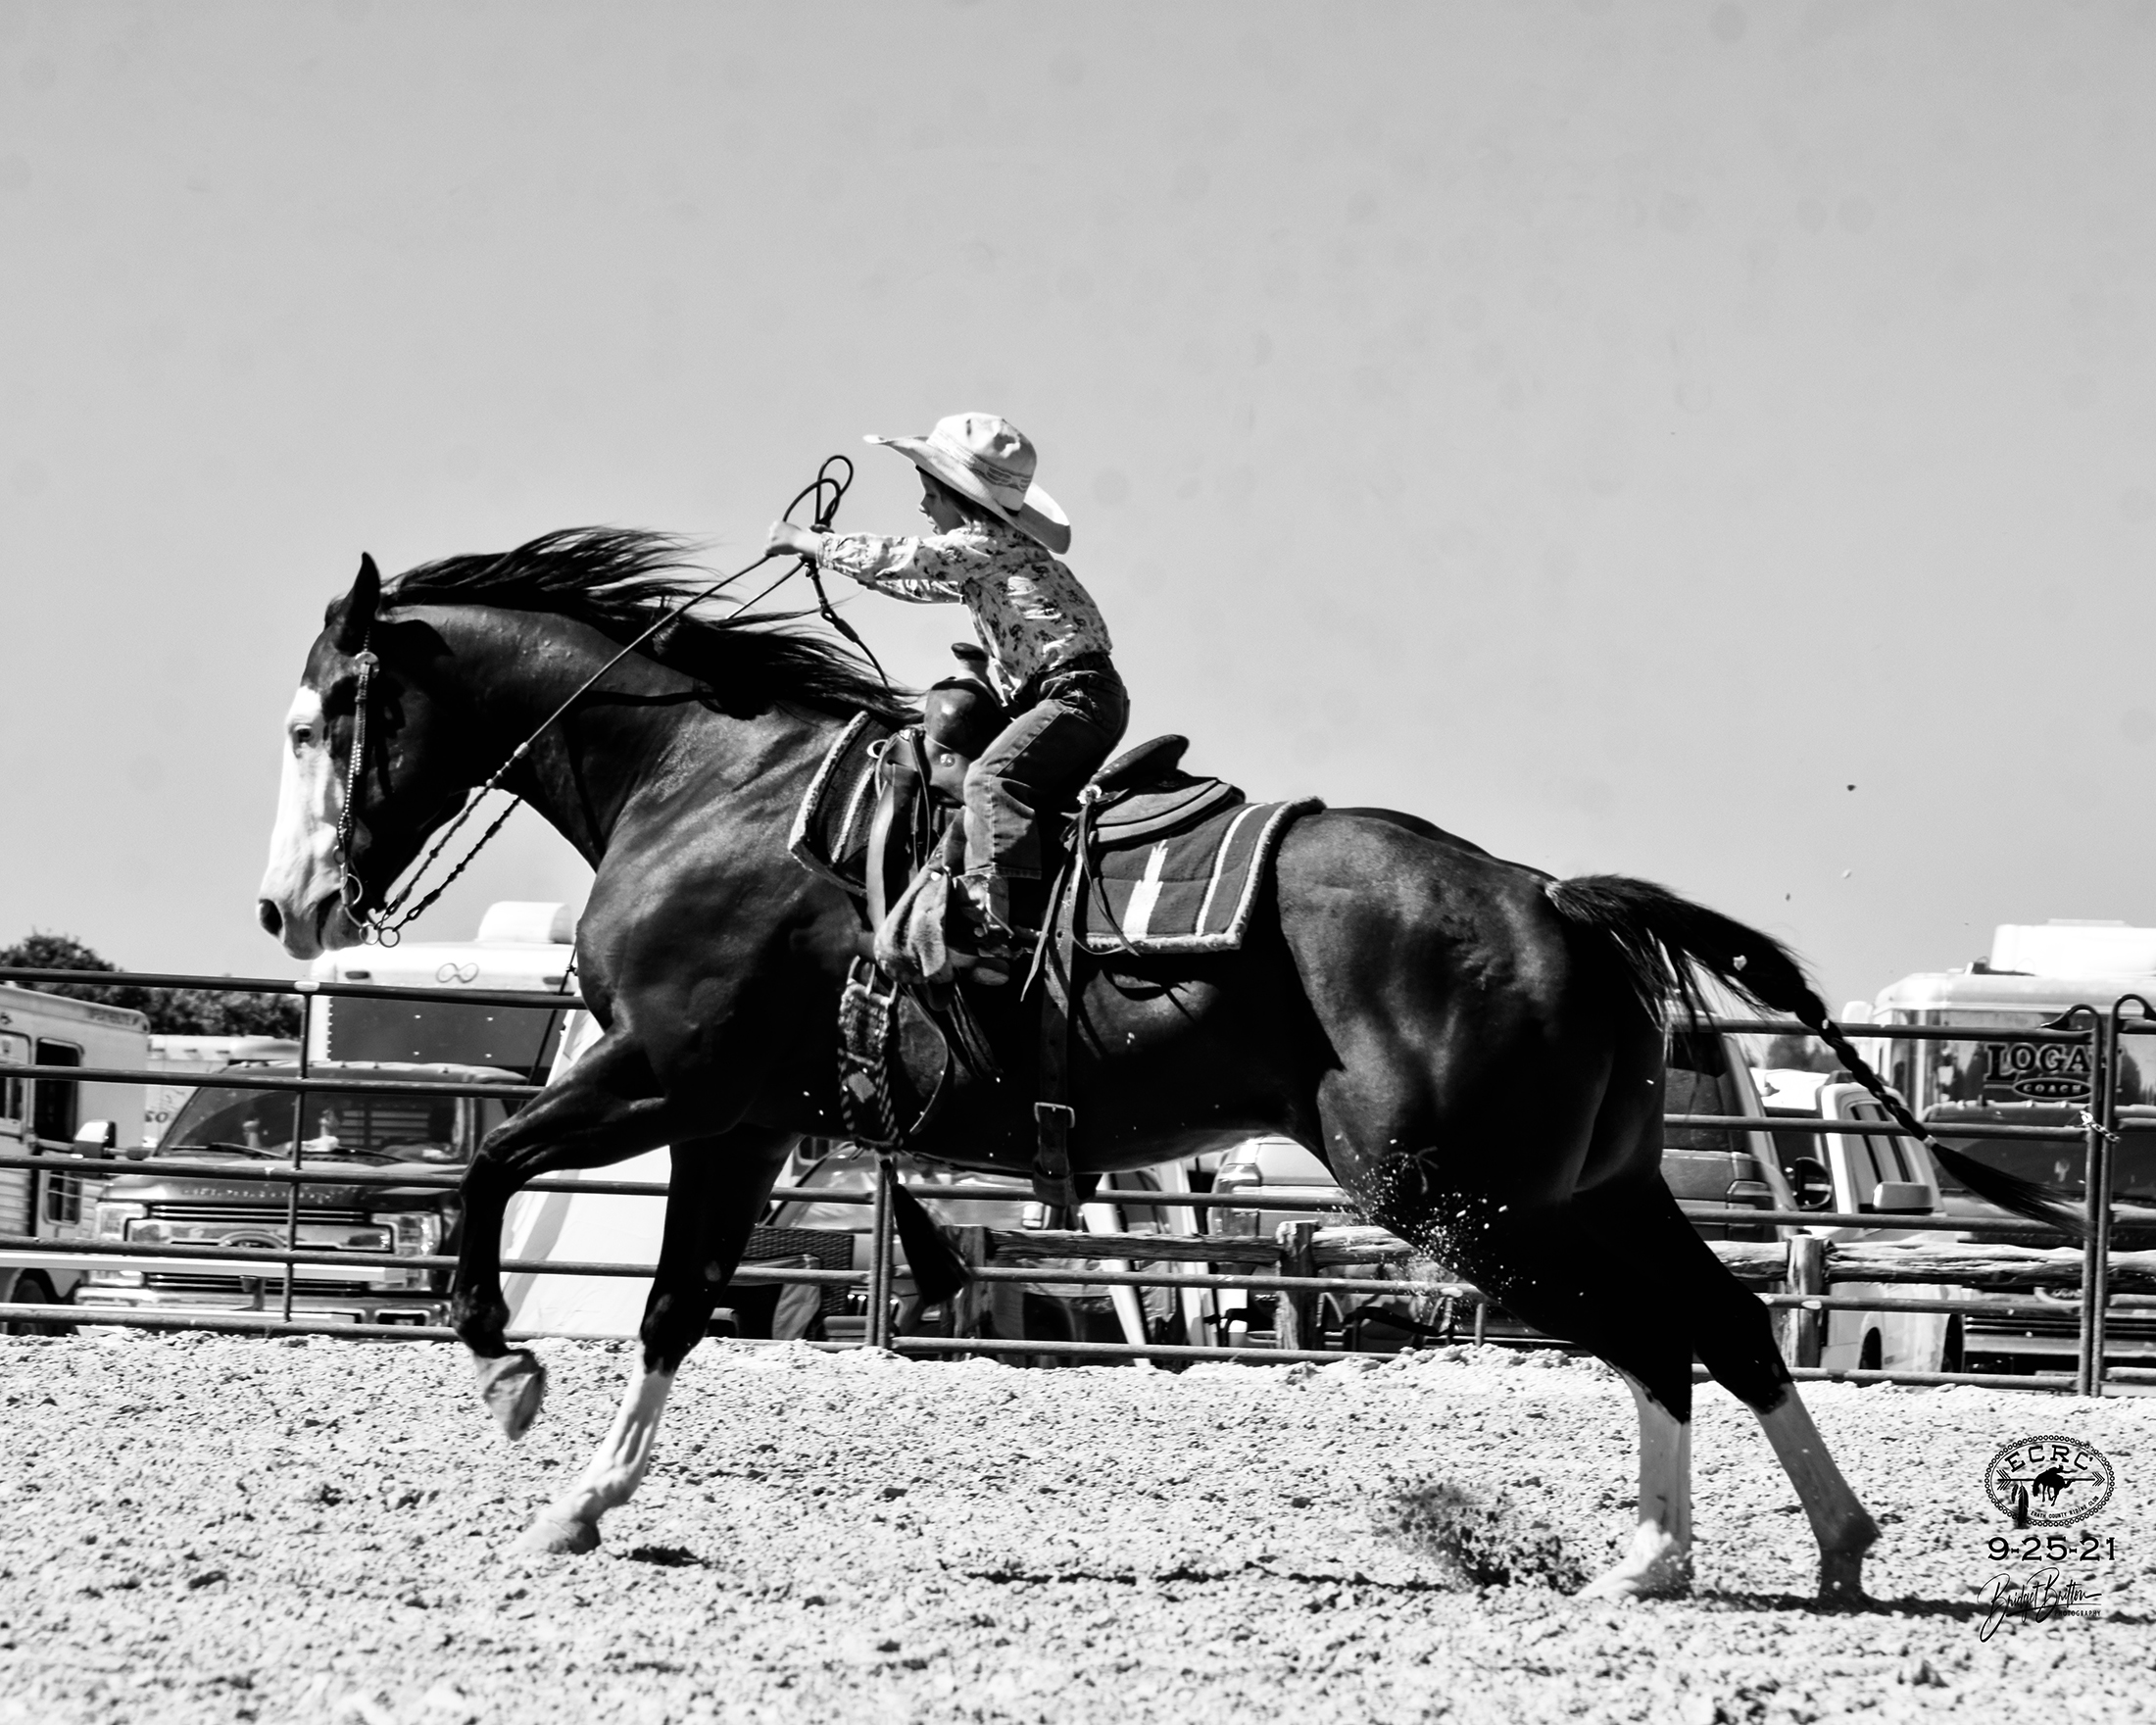 When you ride, focus on achieving lightness in your horse.